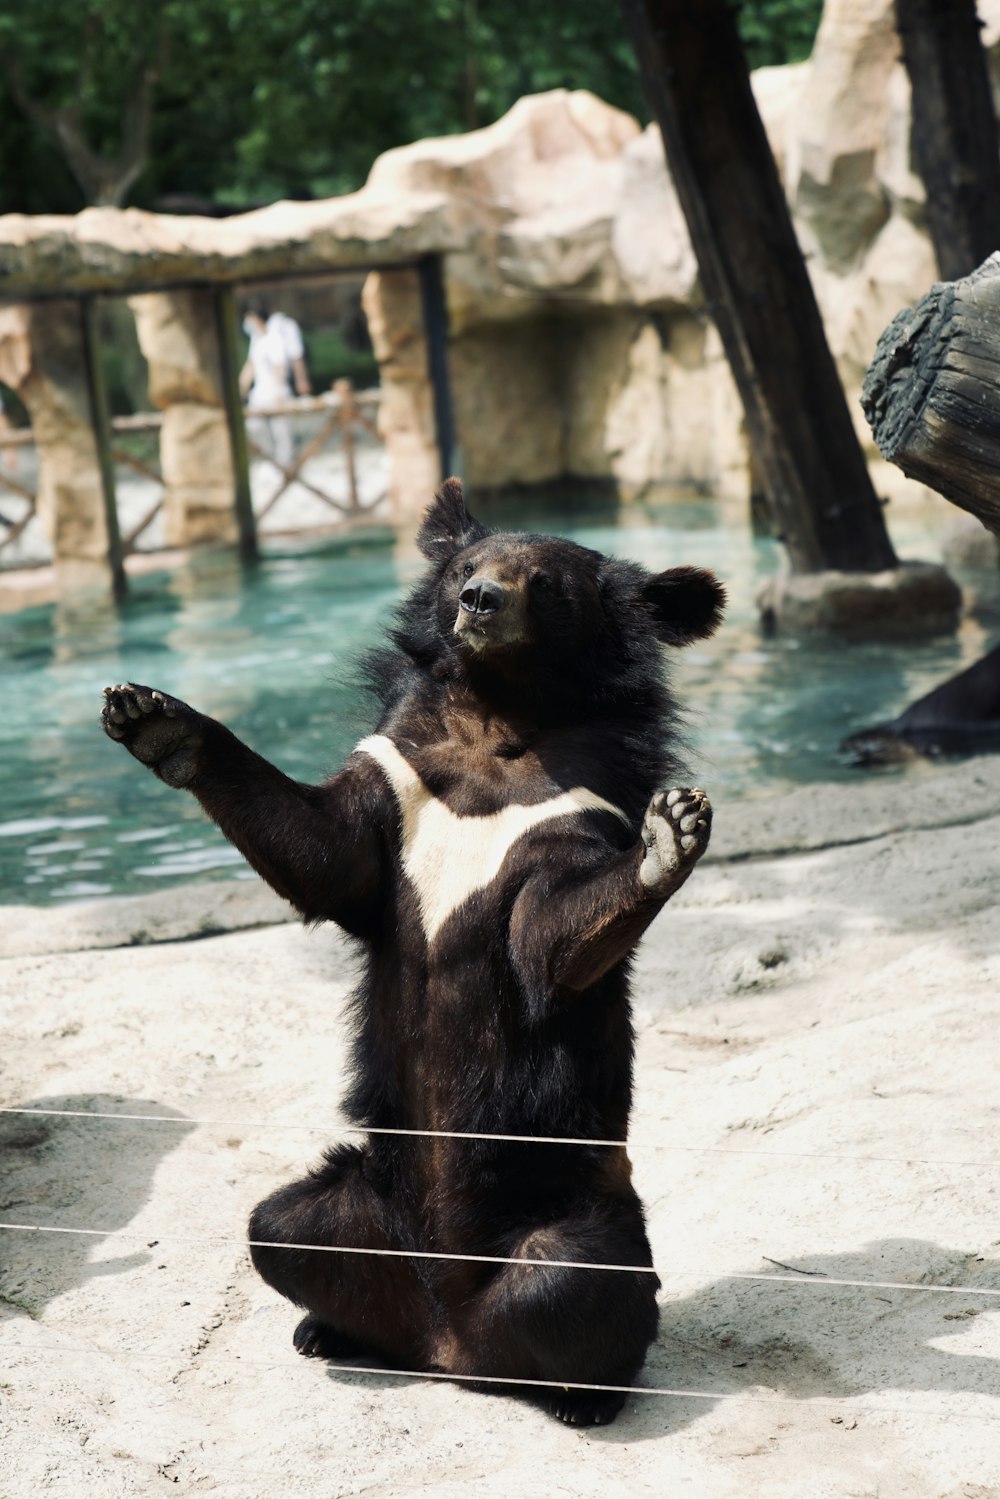 a bear sitting on its hind legs in a zoo enclosure